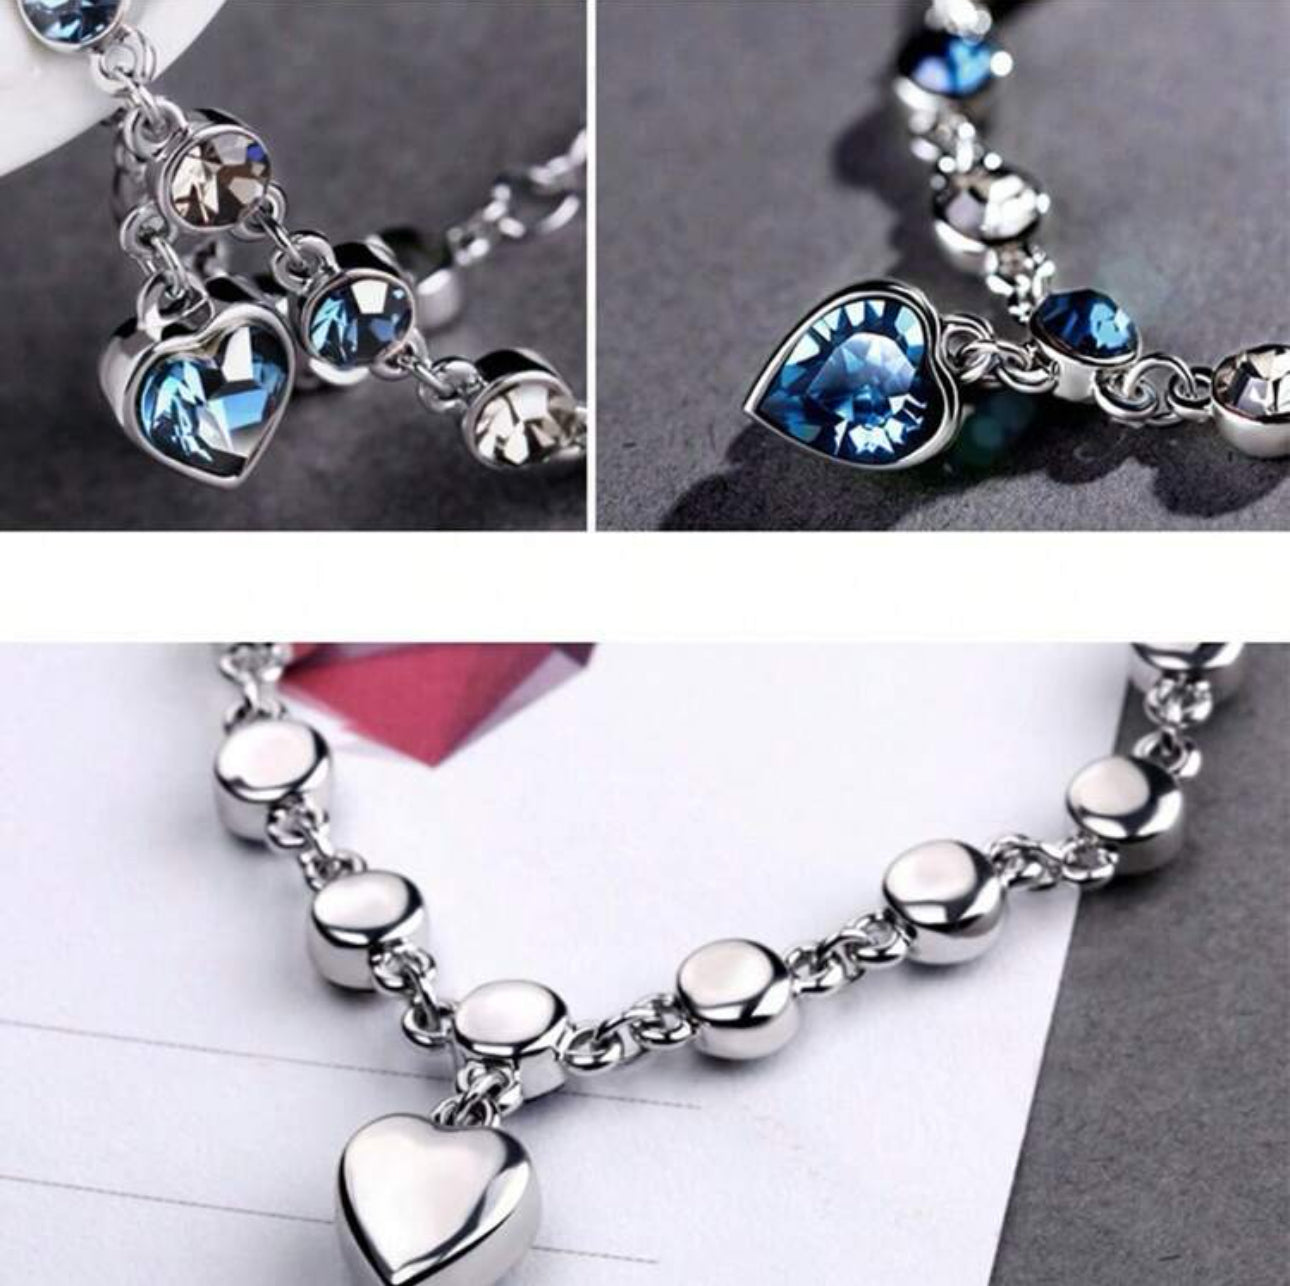 S925 Sterling Silver Adjustable Love Heart Link Bracelet with Blue Crystal Birthday Anniversary Jewelry Gifts